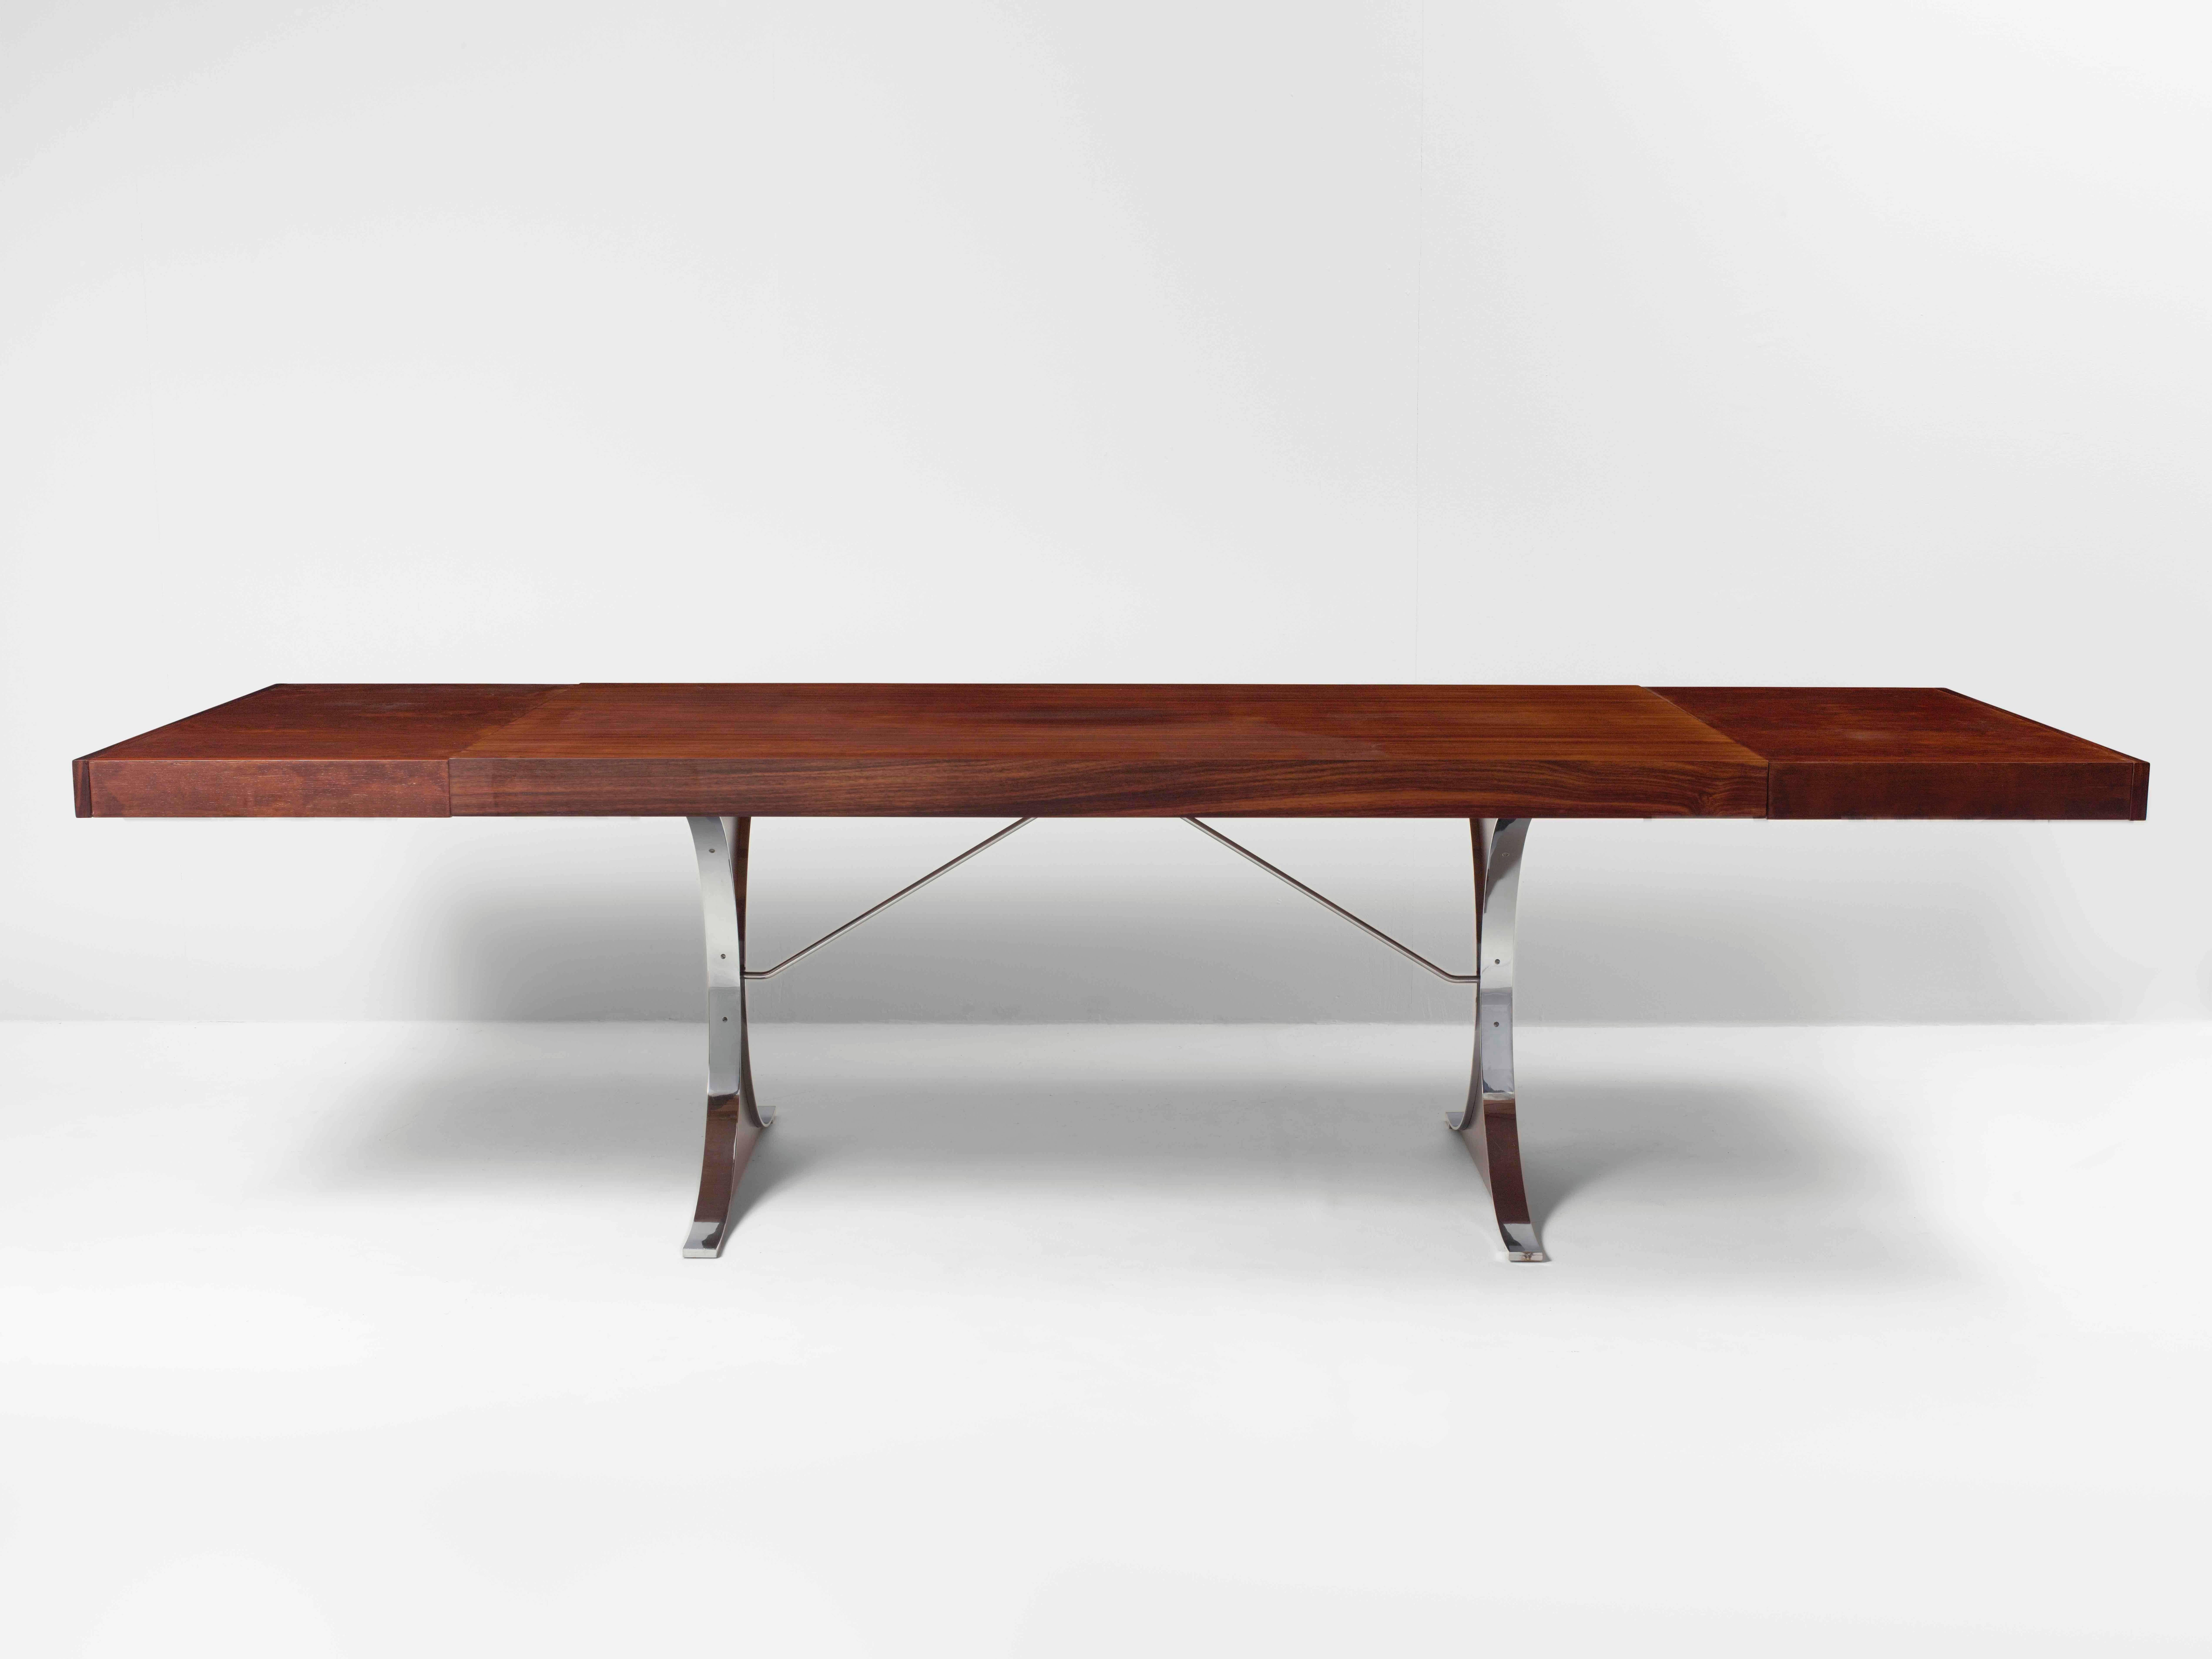 Table Sylvie by René-Jean Caillette (1919-2004.)
Charron edition, 1961.

Lenght is 300 cm when opened.